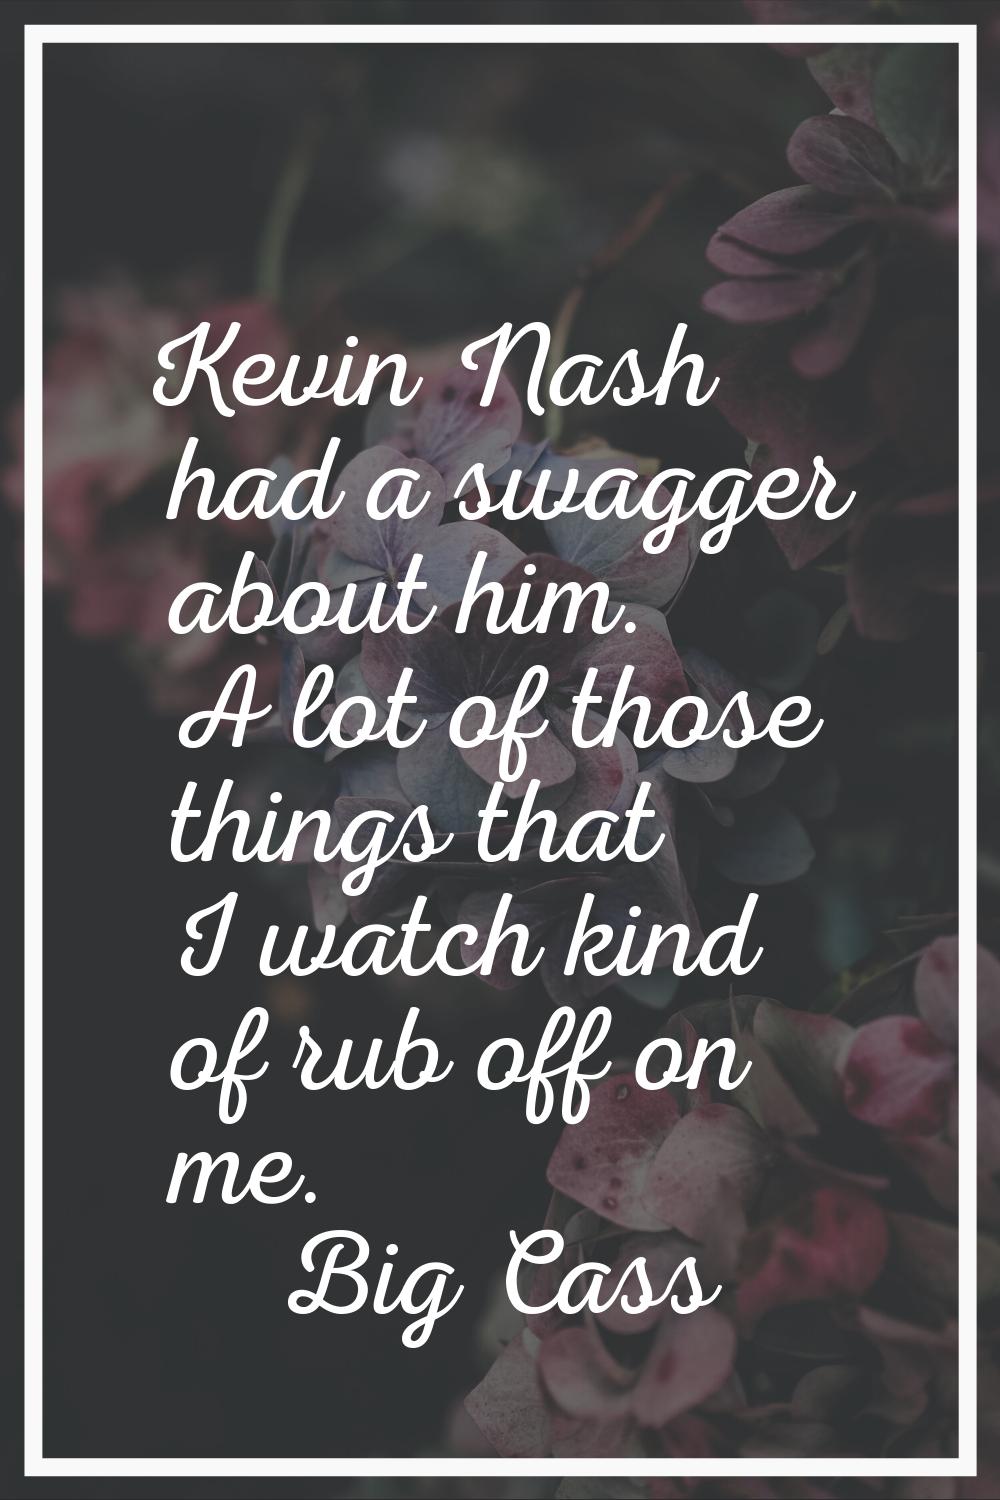 Kevin Nash had a swagger about him. A lot of those things that I watch kind of rub off on me.